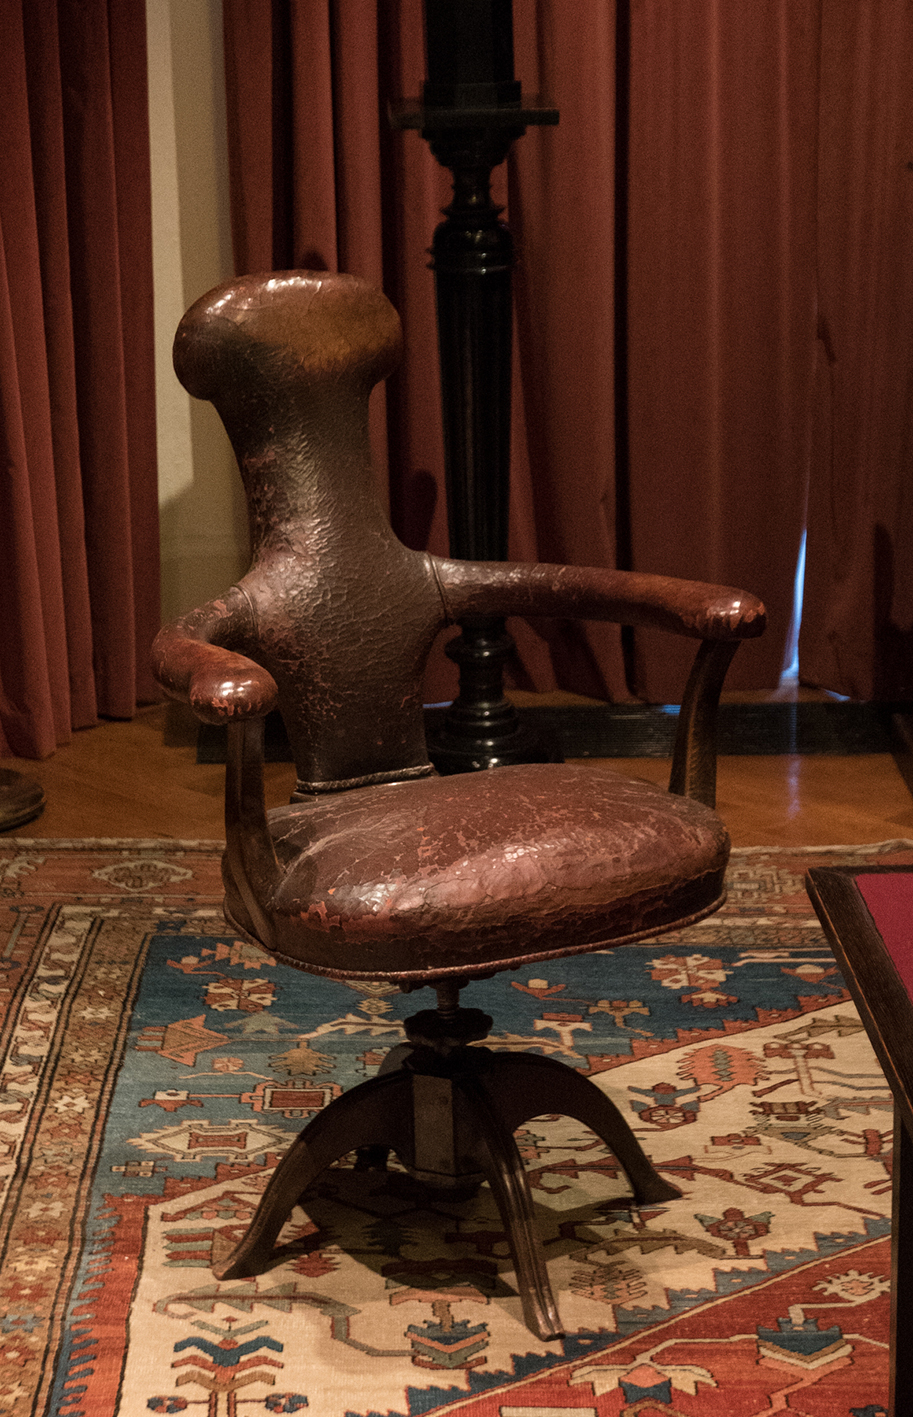 Richmond Nicholas Photography. Freud's study in London - his remarkable chair made to his own design.